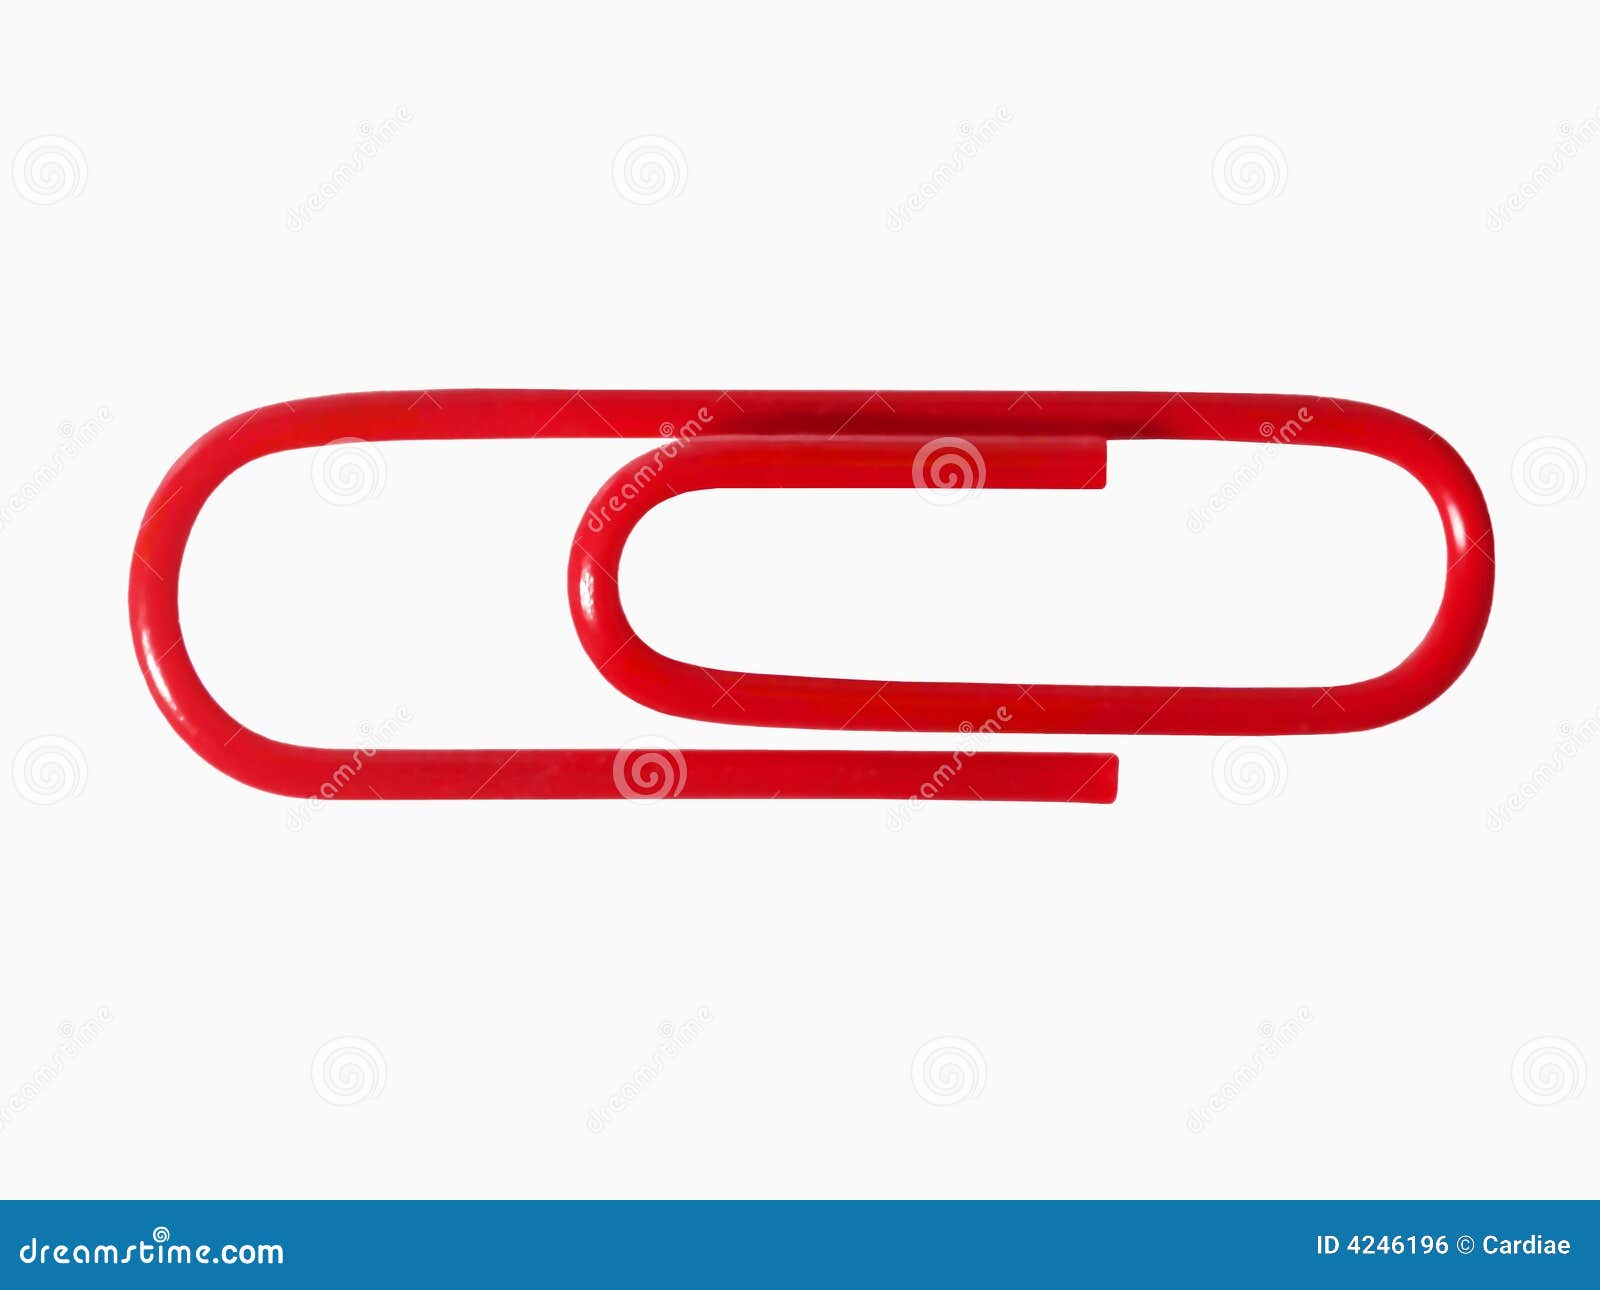 Clip перевод на русский. Clip перевод. Скрепка из Переводчика. One Red paperclip. Red paperclip... Перевести на русский язык.